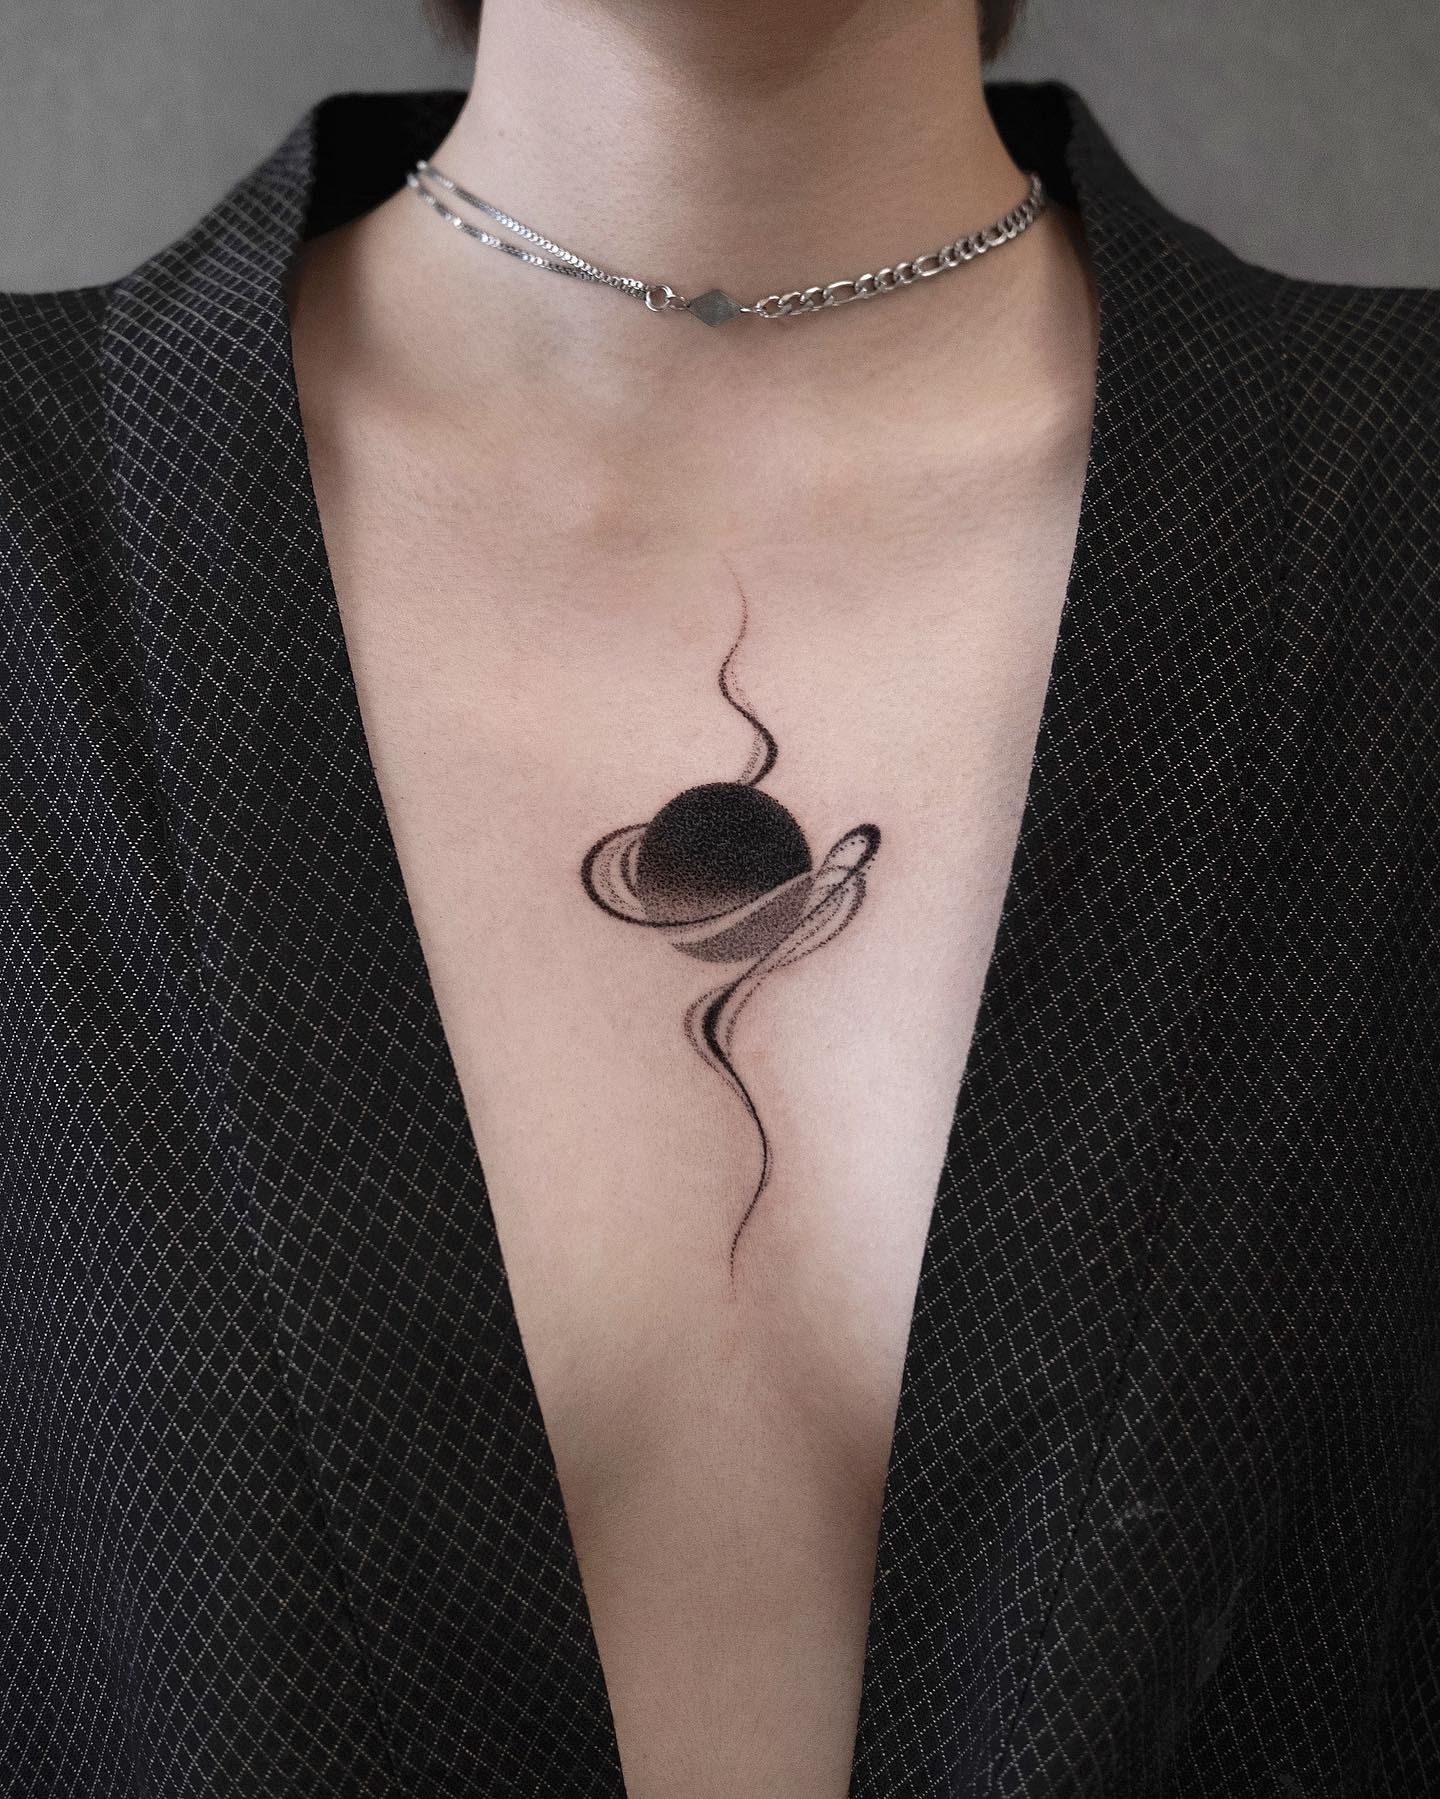 Chest Tattoos Ideas for Women 17